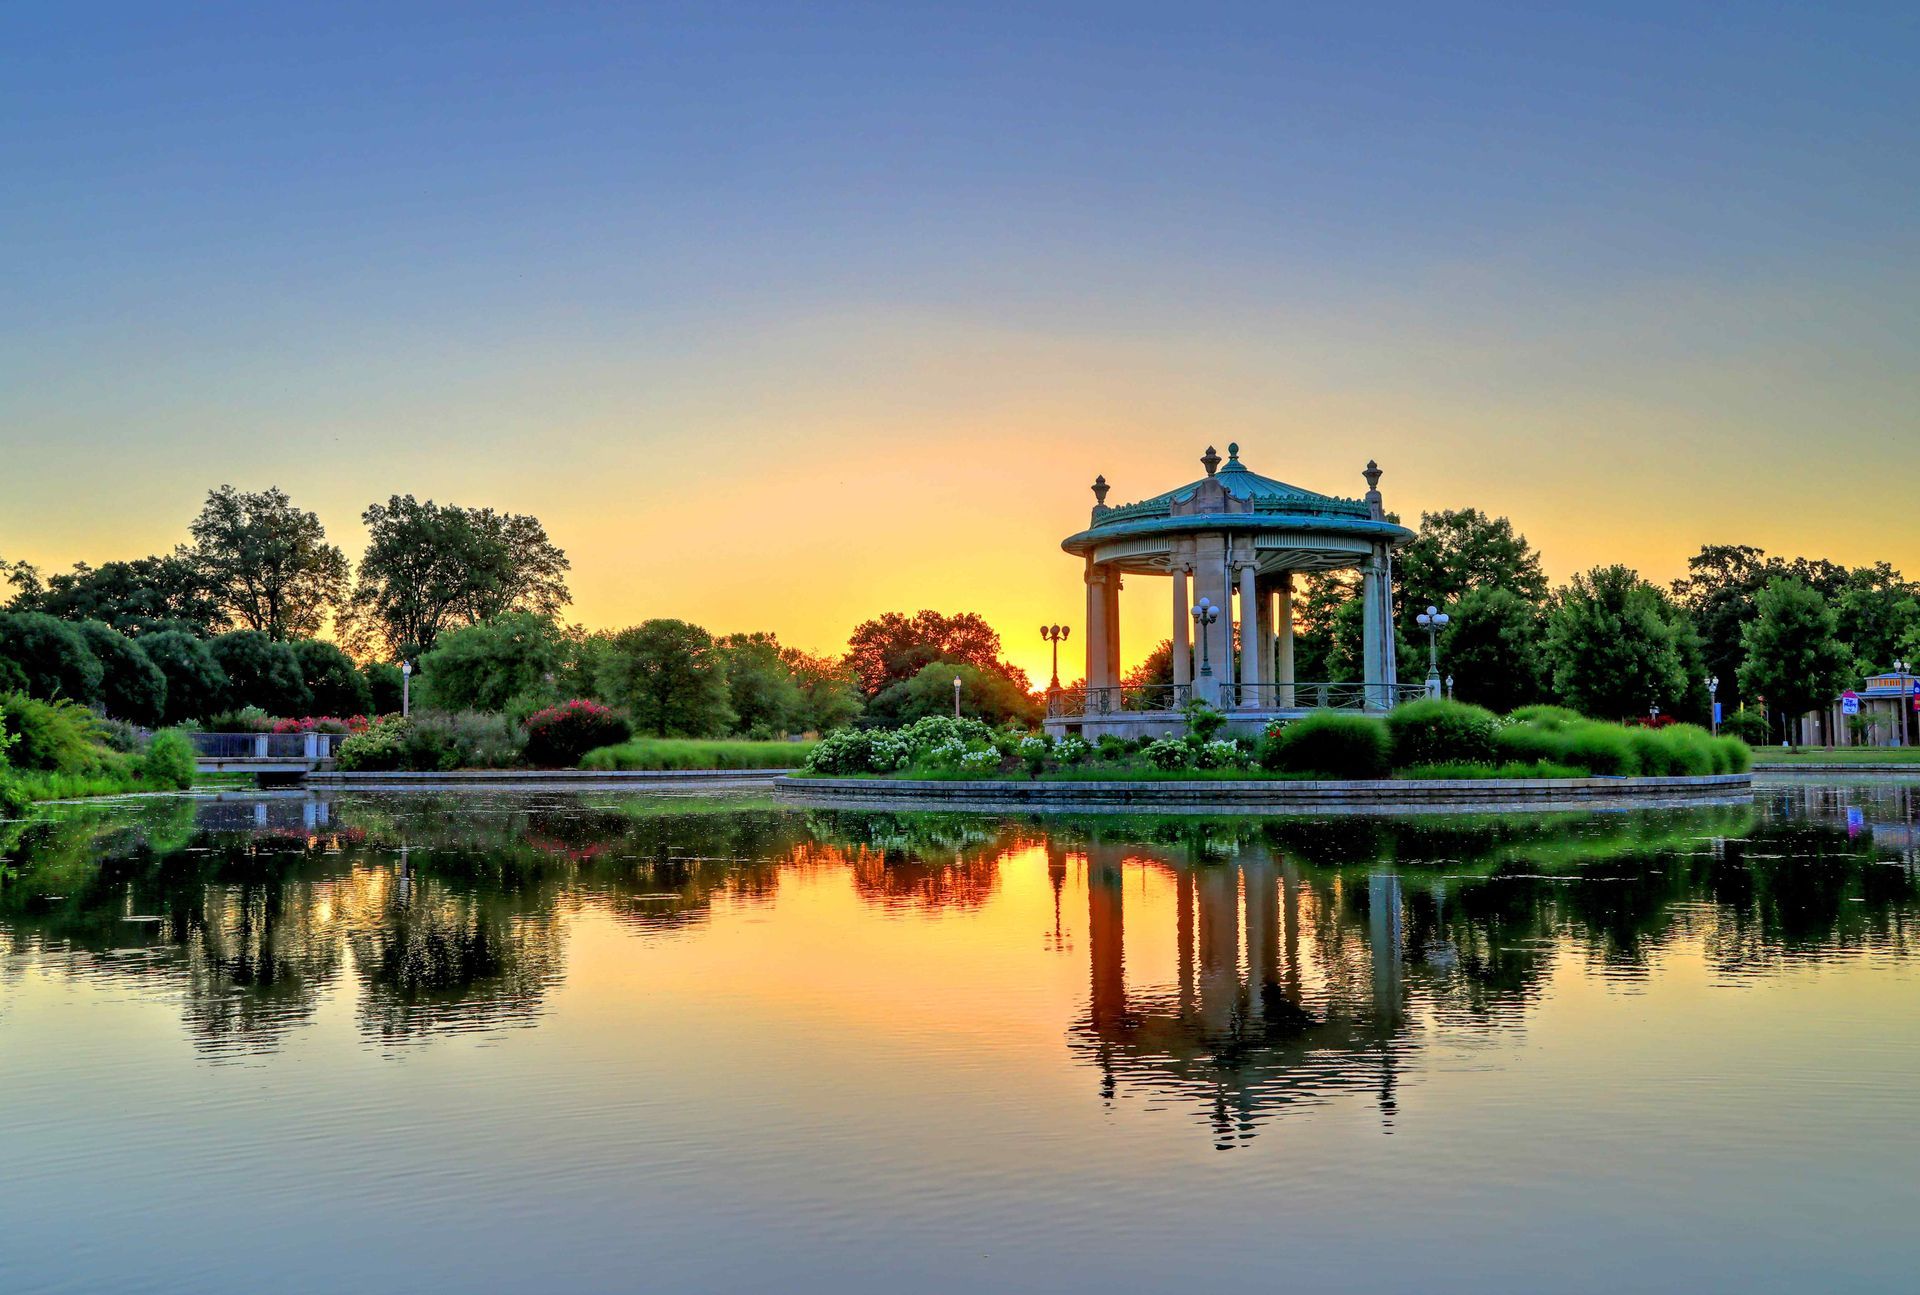 The sun sets behind the bandstand in Forest Park, St. Louis, Missouri